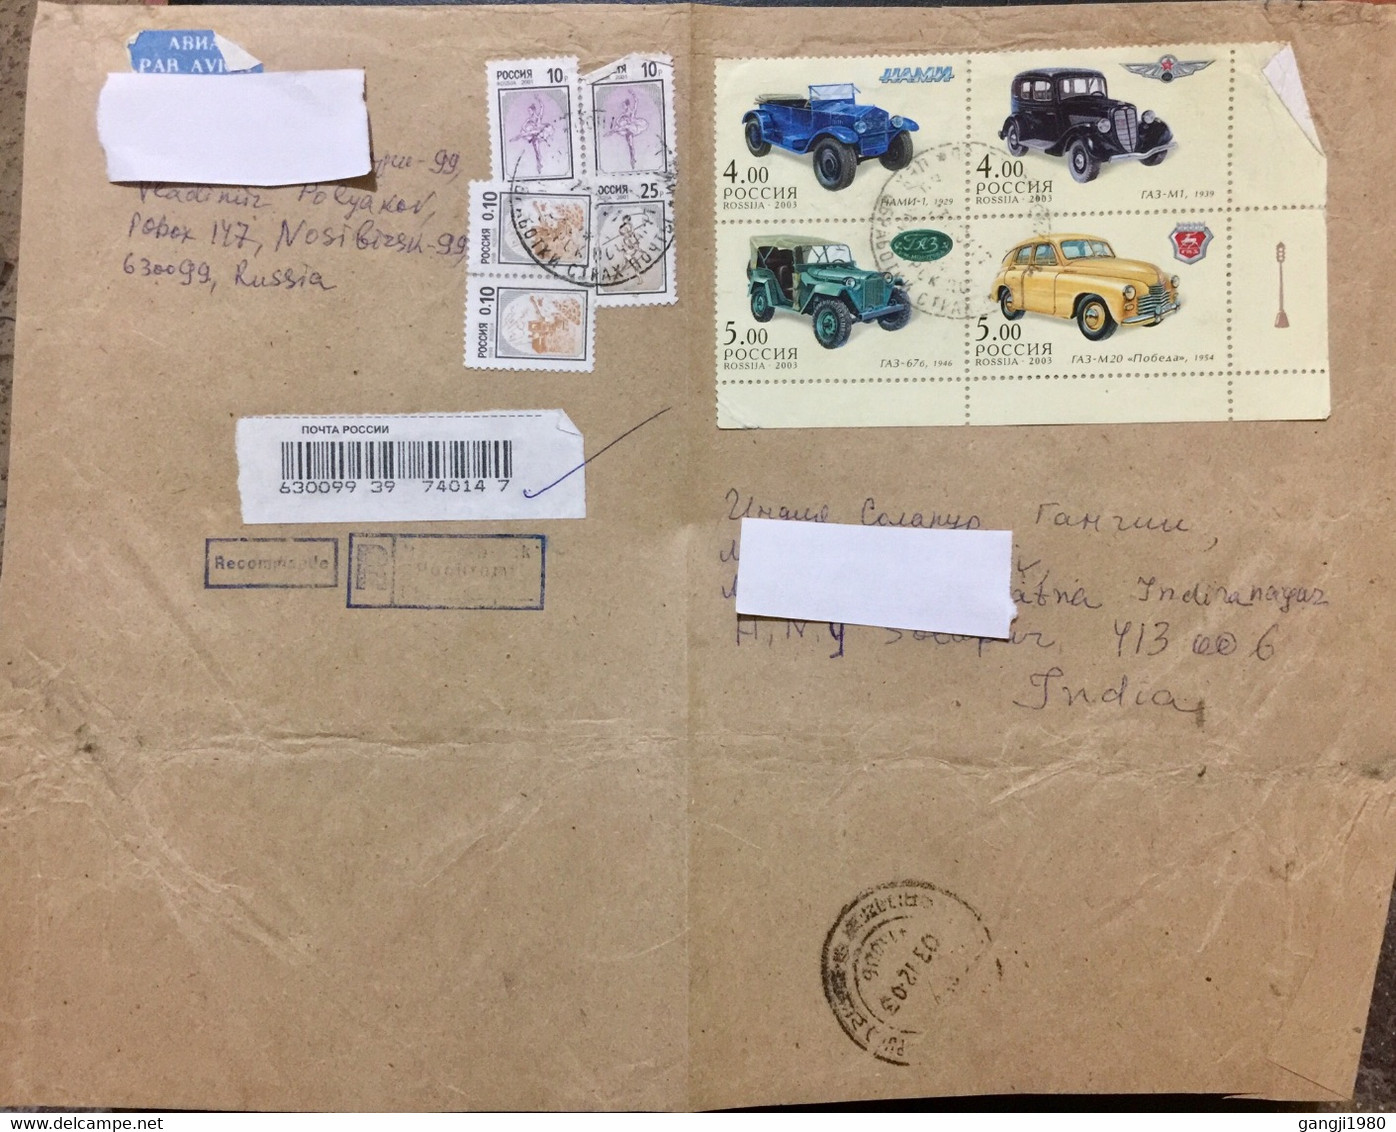 RUSSIA 2003, REGISTERED USED AIRMAIL FRONT ONLY ! VINTAGE CAR MODELS,DANCE,AGRICULTURE - Covers & Documents